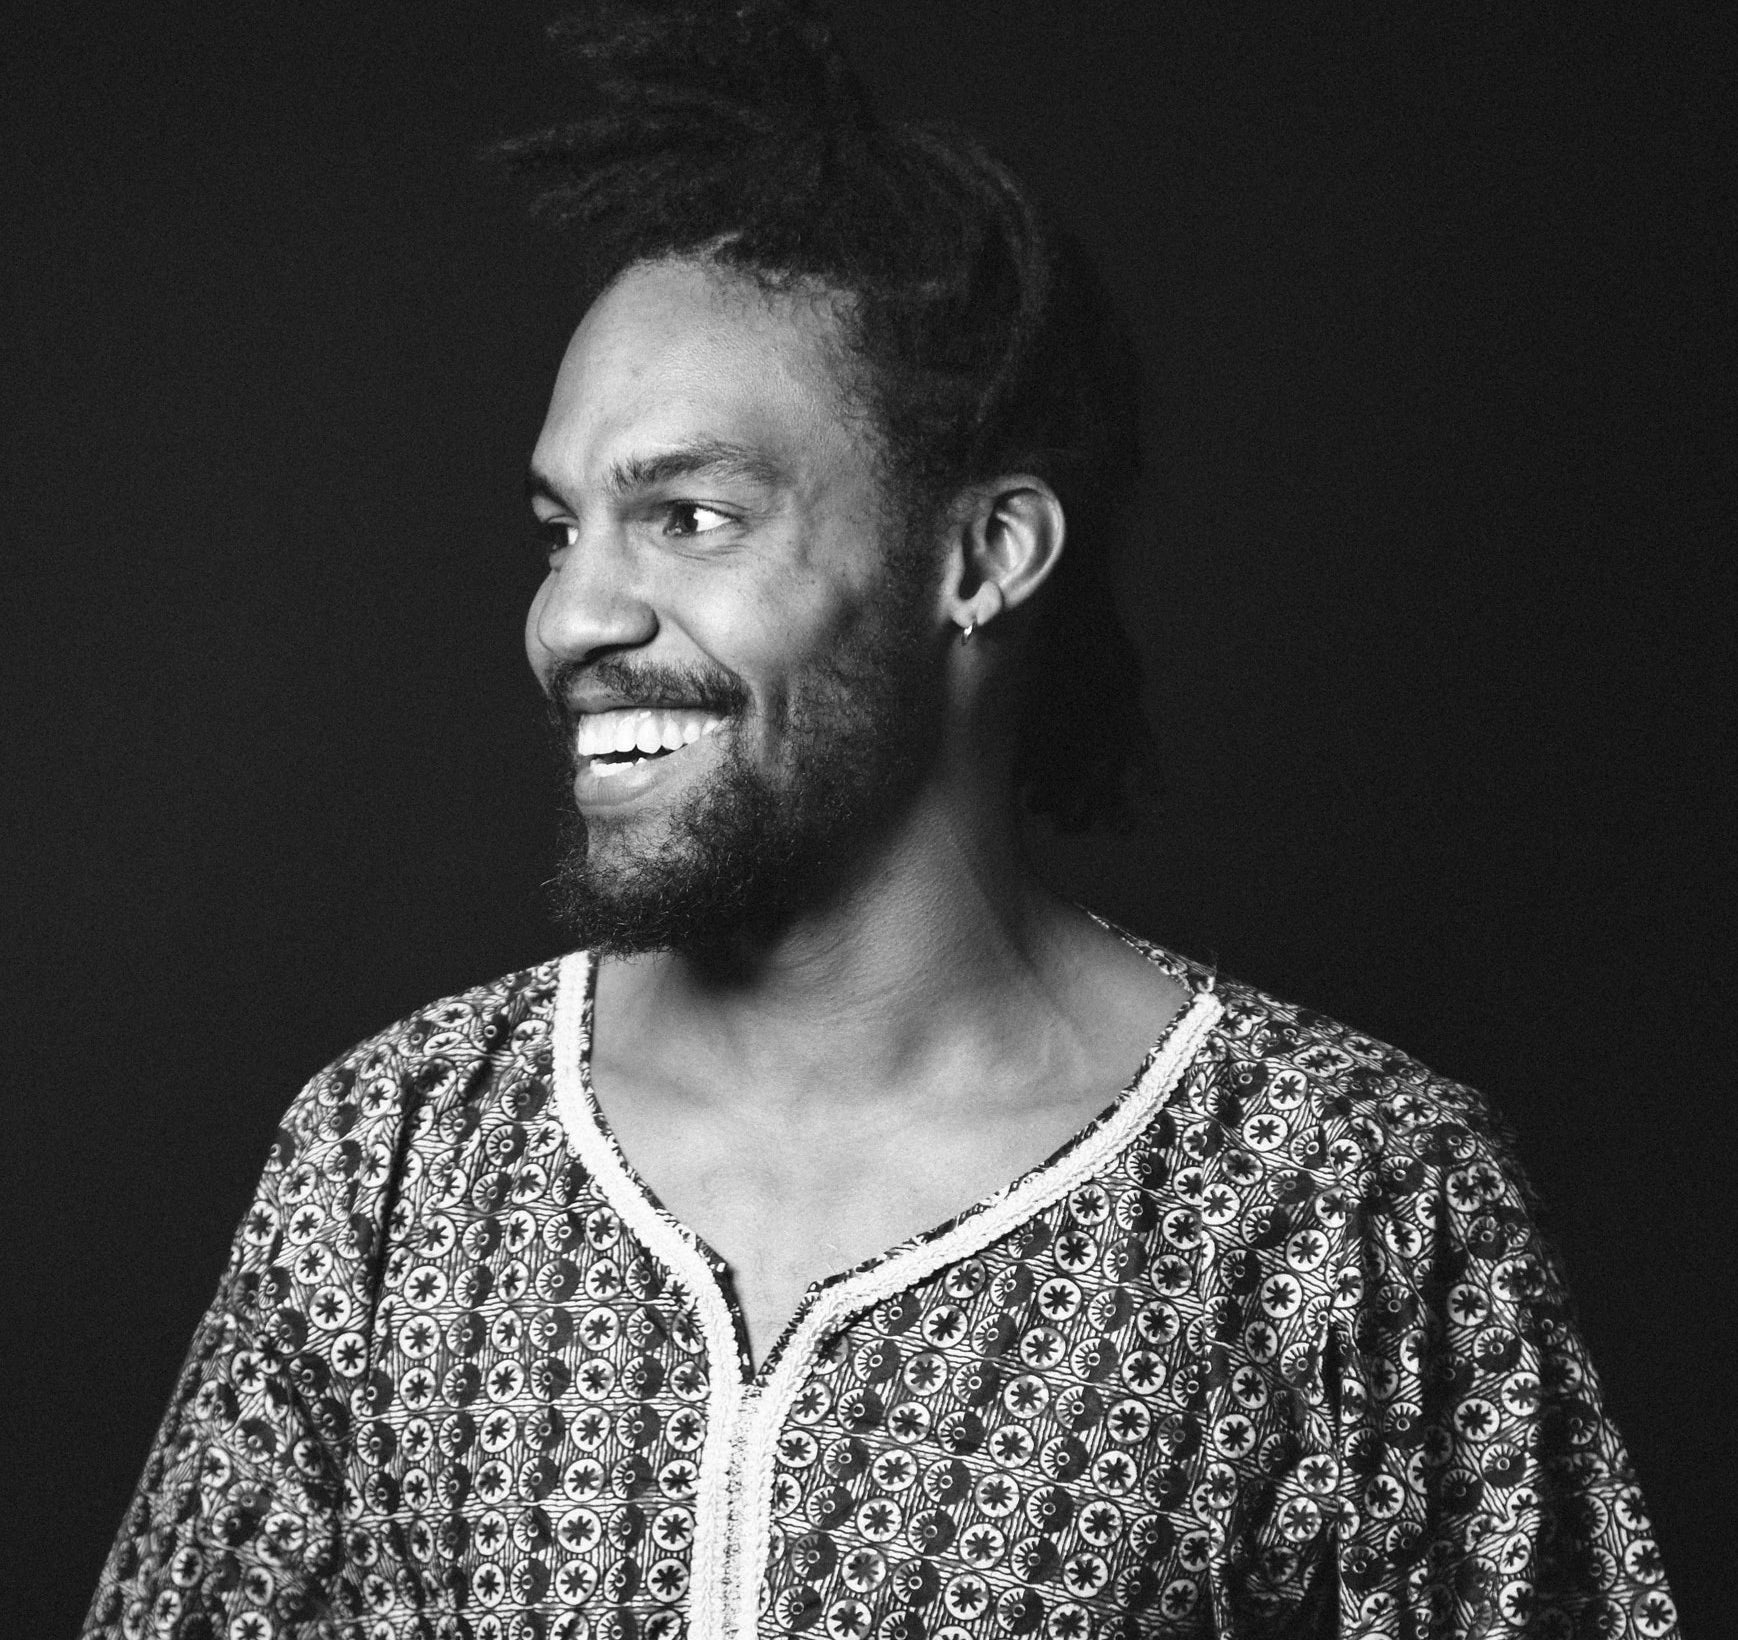 Pierce Freelon photographed in black and white, wearing a dashiki and smiling